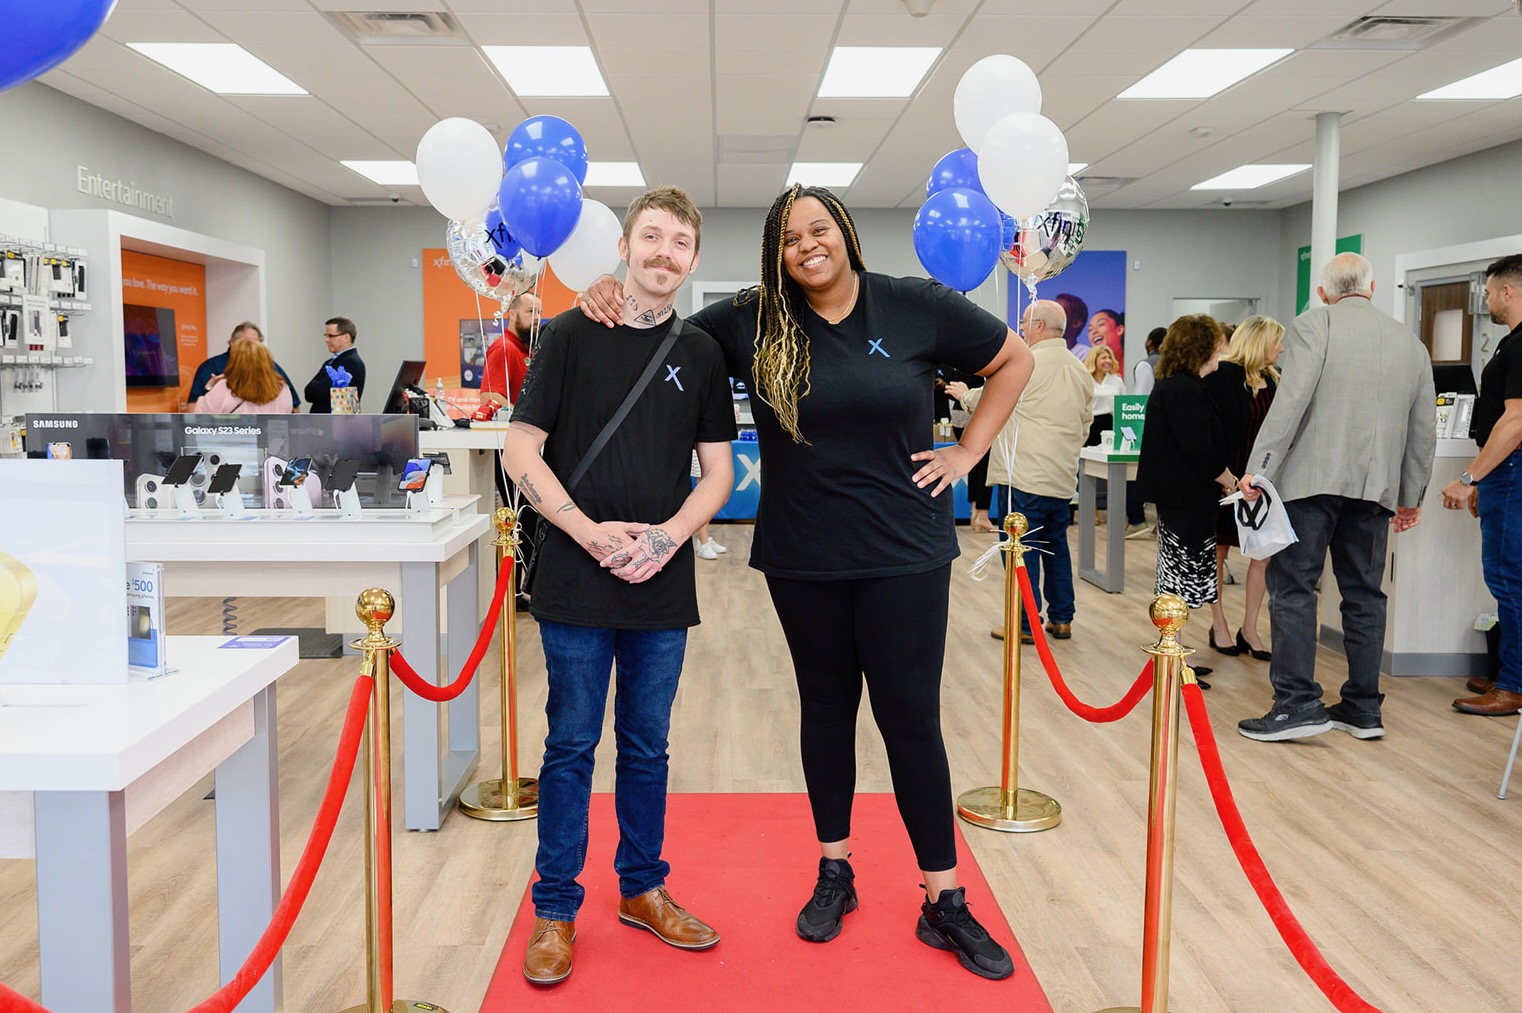 Two people wearing black Xfinity t-shirts standing at end of red carpet in Xfinity store